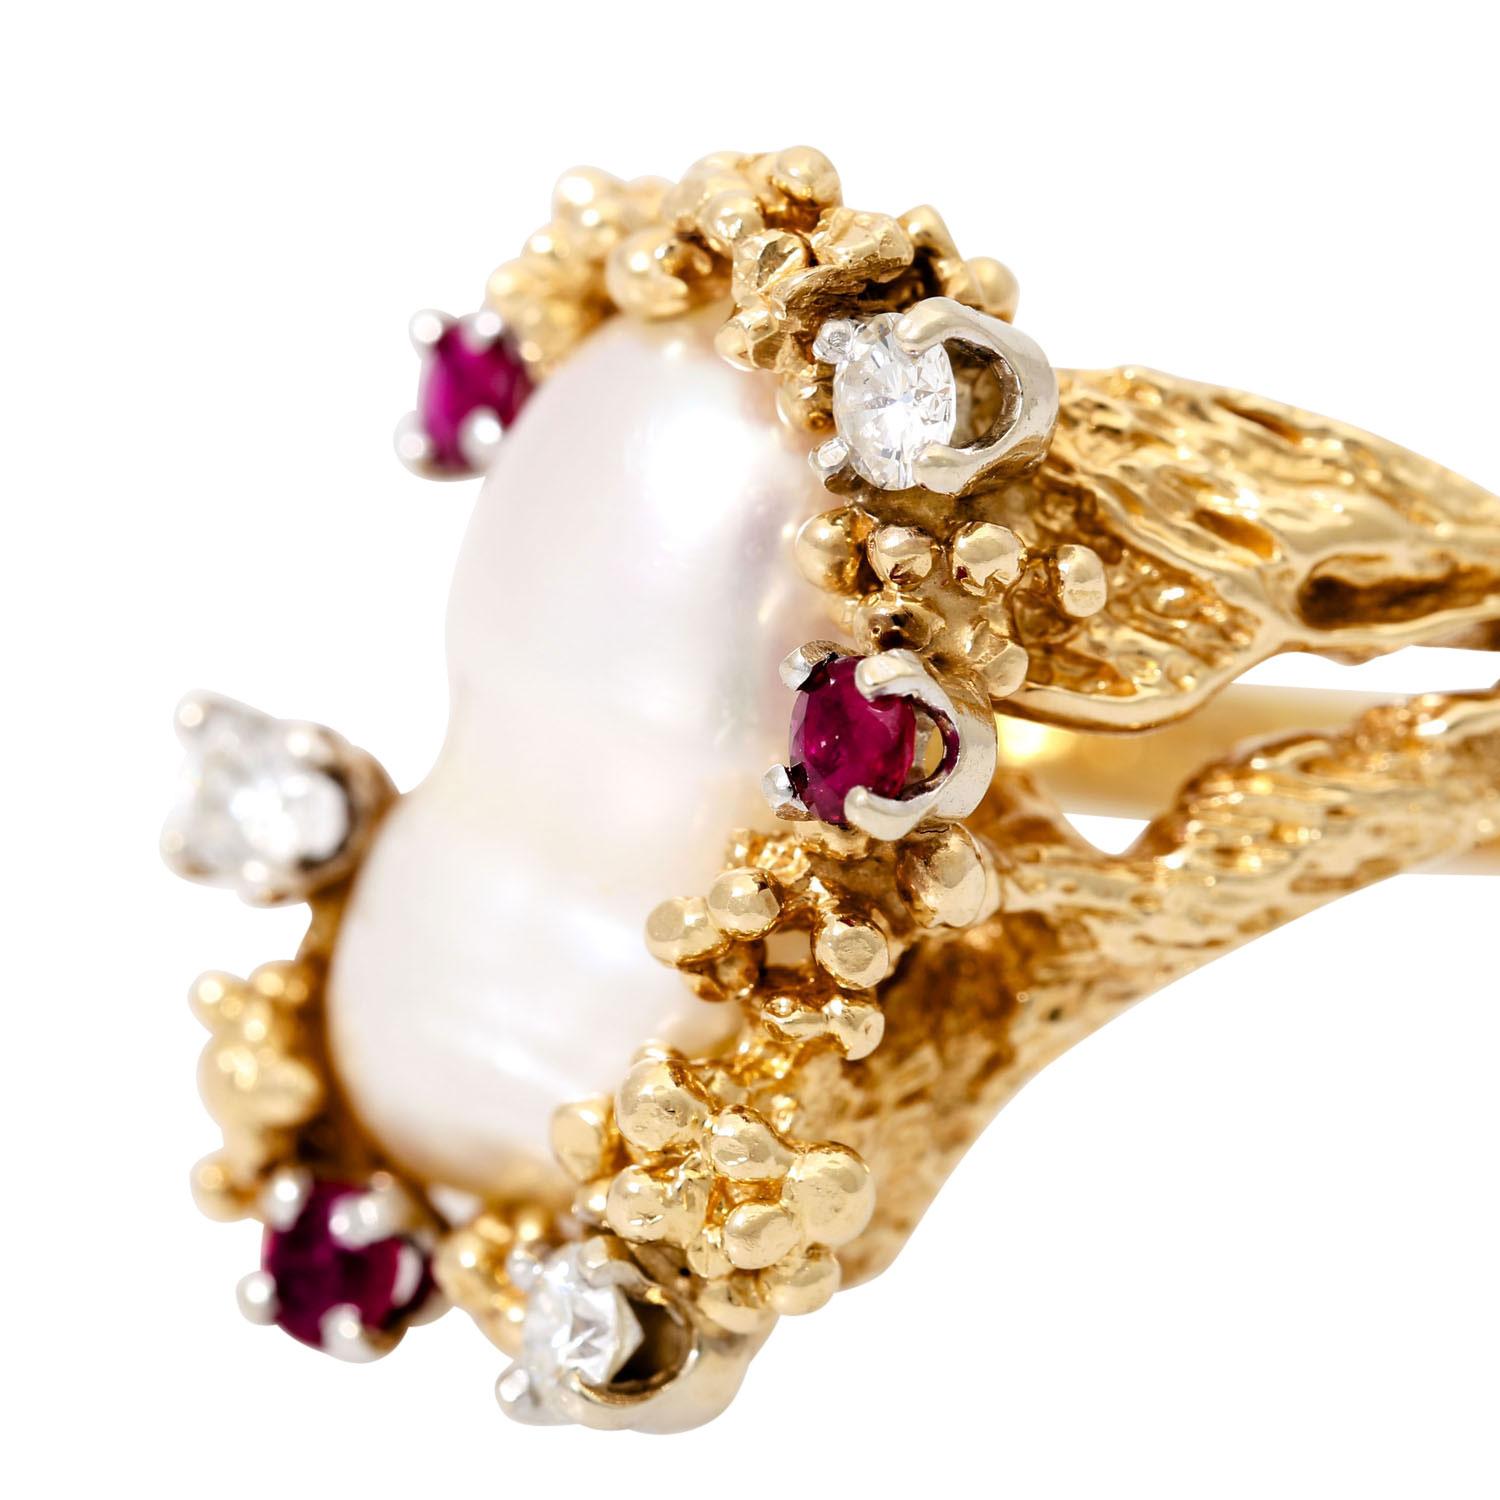 Modern Ring with Biwaperle, 3 Rubies and 3 Brilliant-Cut Diamonds Total Approx. 0.2 Ct For Sale